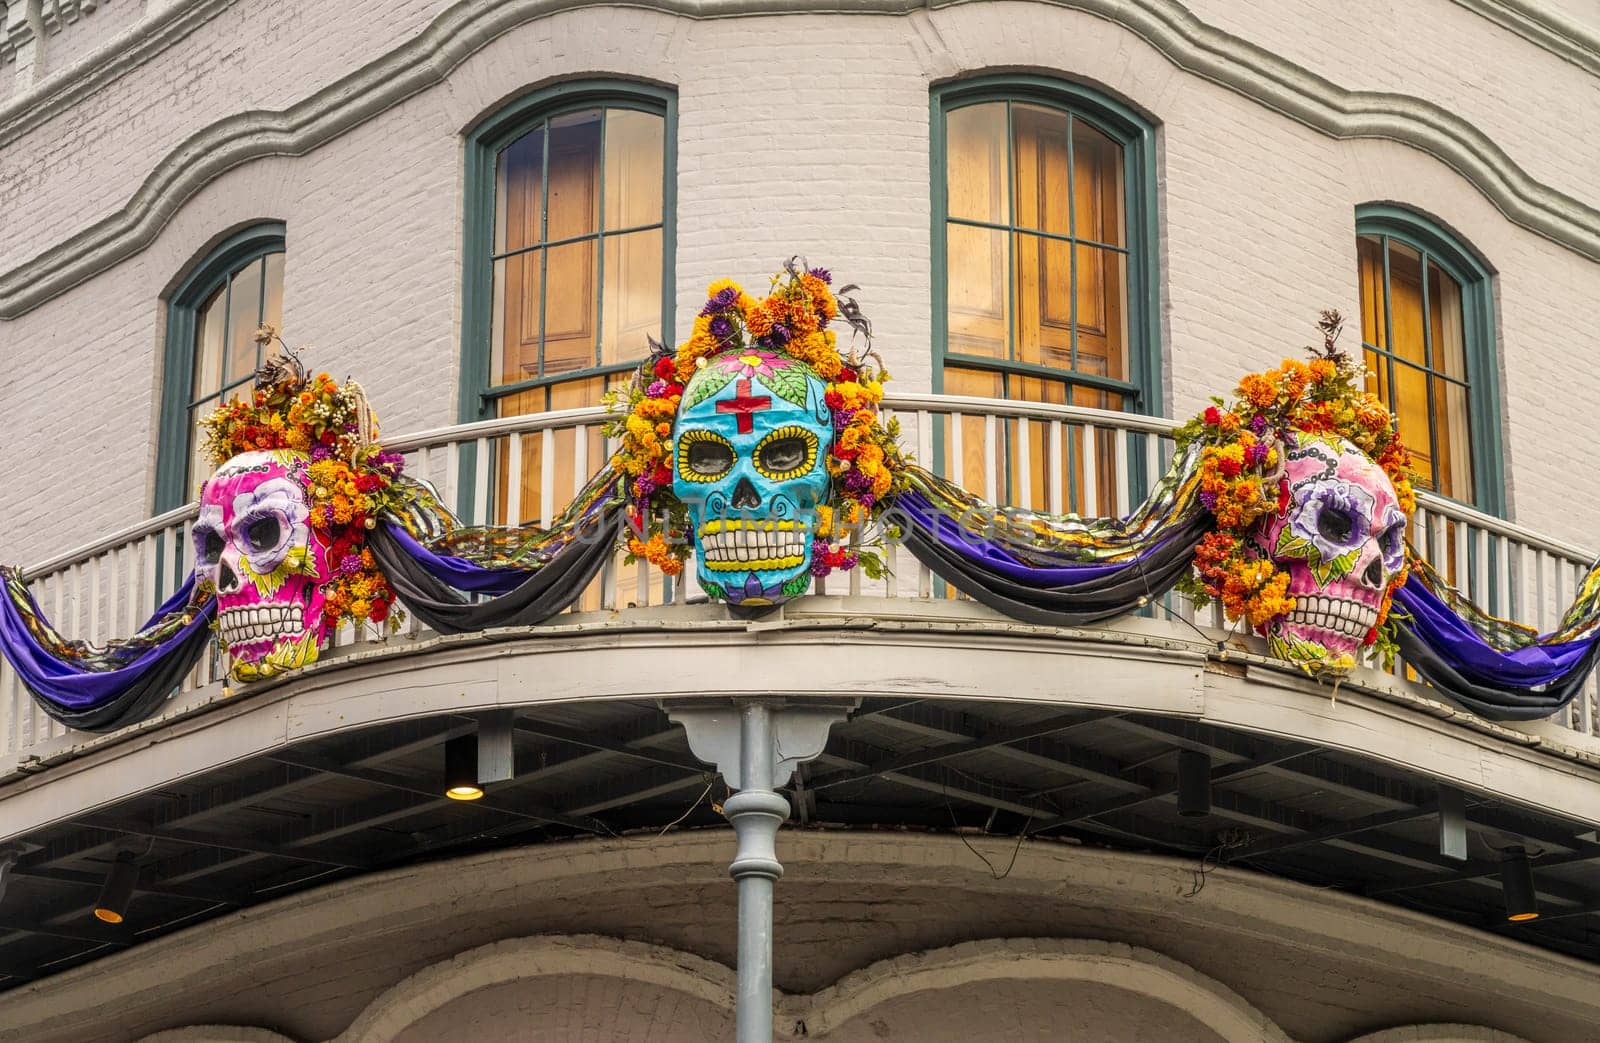 Painted skulls on New Orleans balcony for Halloween by steheap